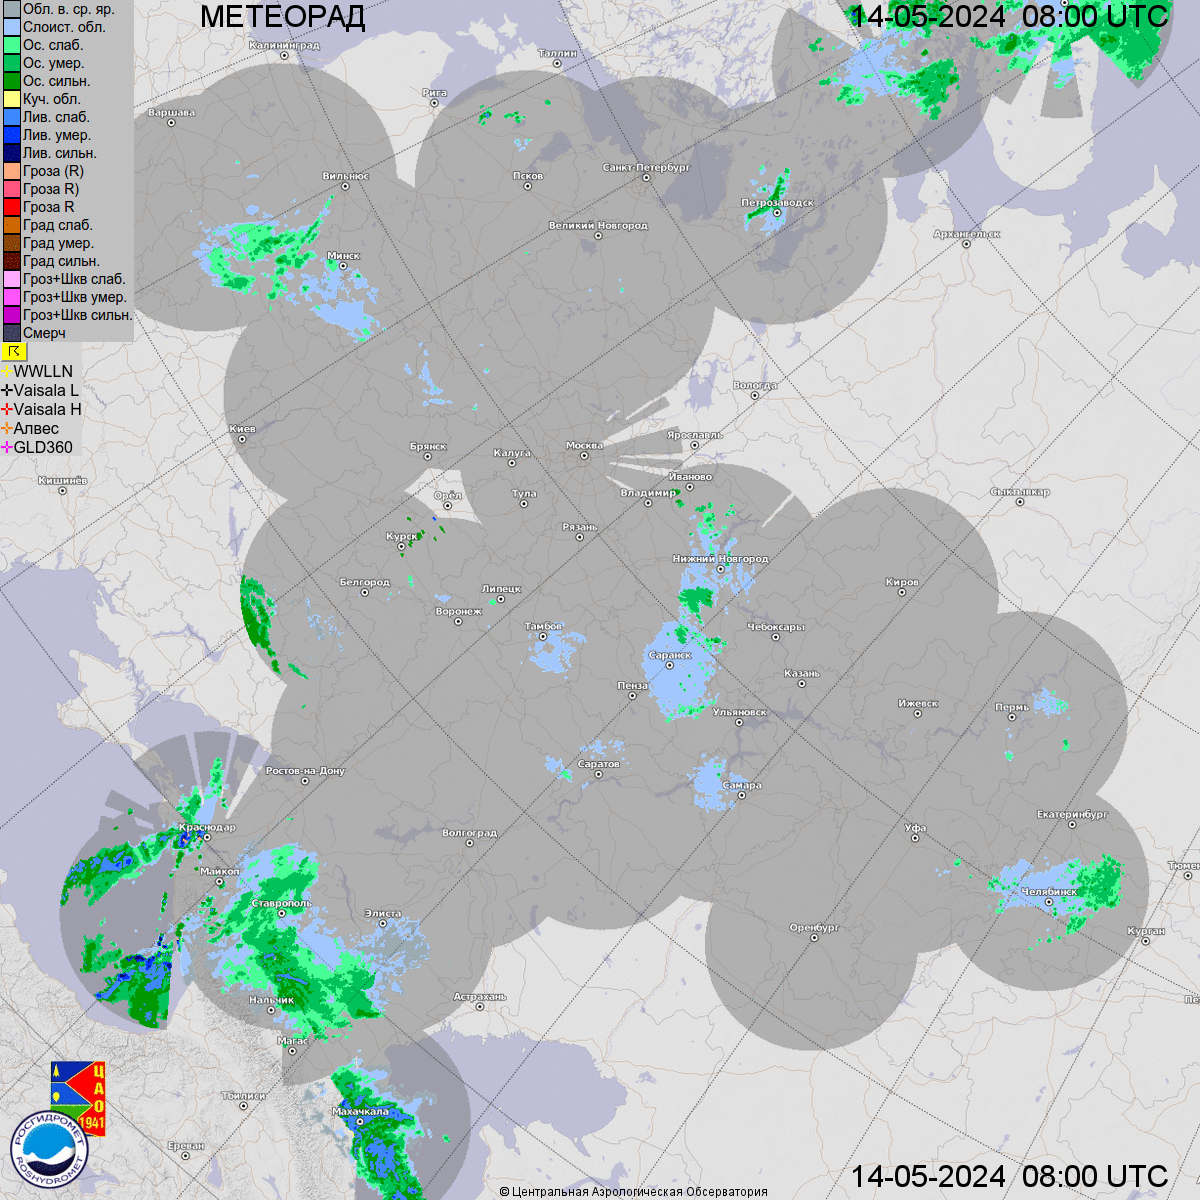 Weather phenomena during the recent 3 hours (on the basis of radar observations)